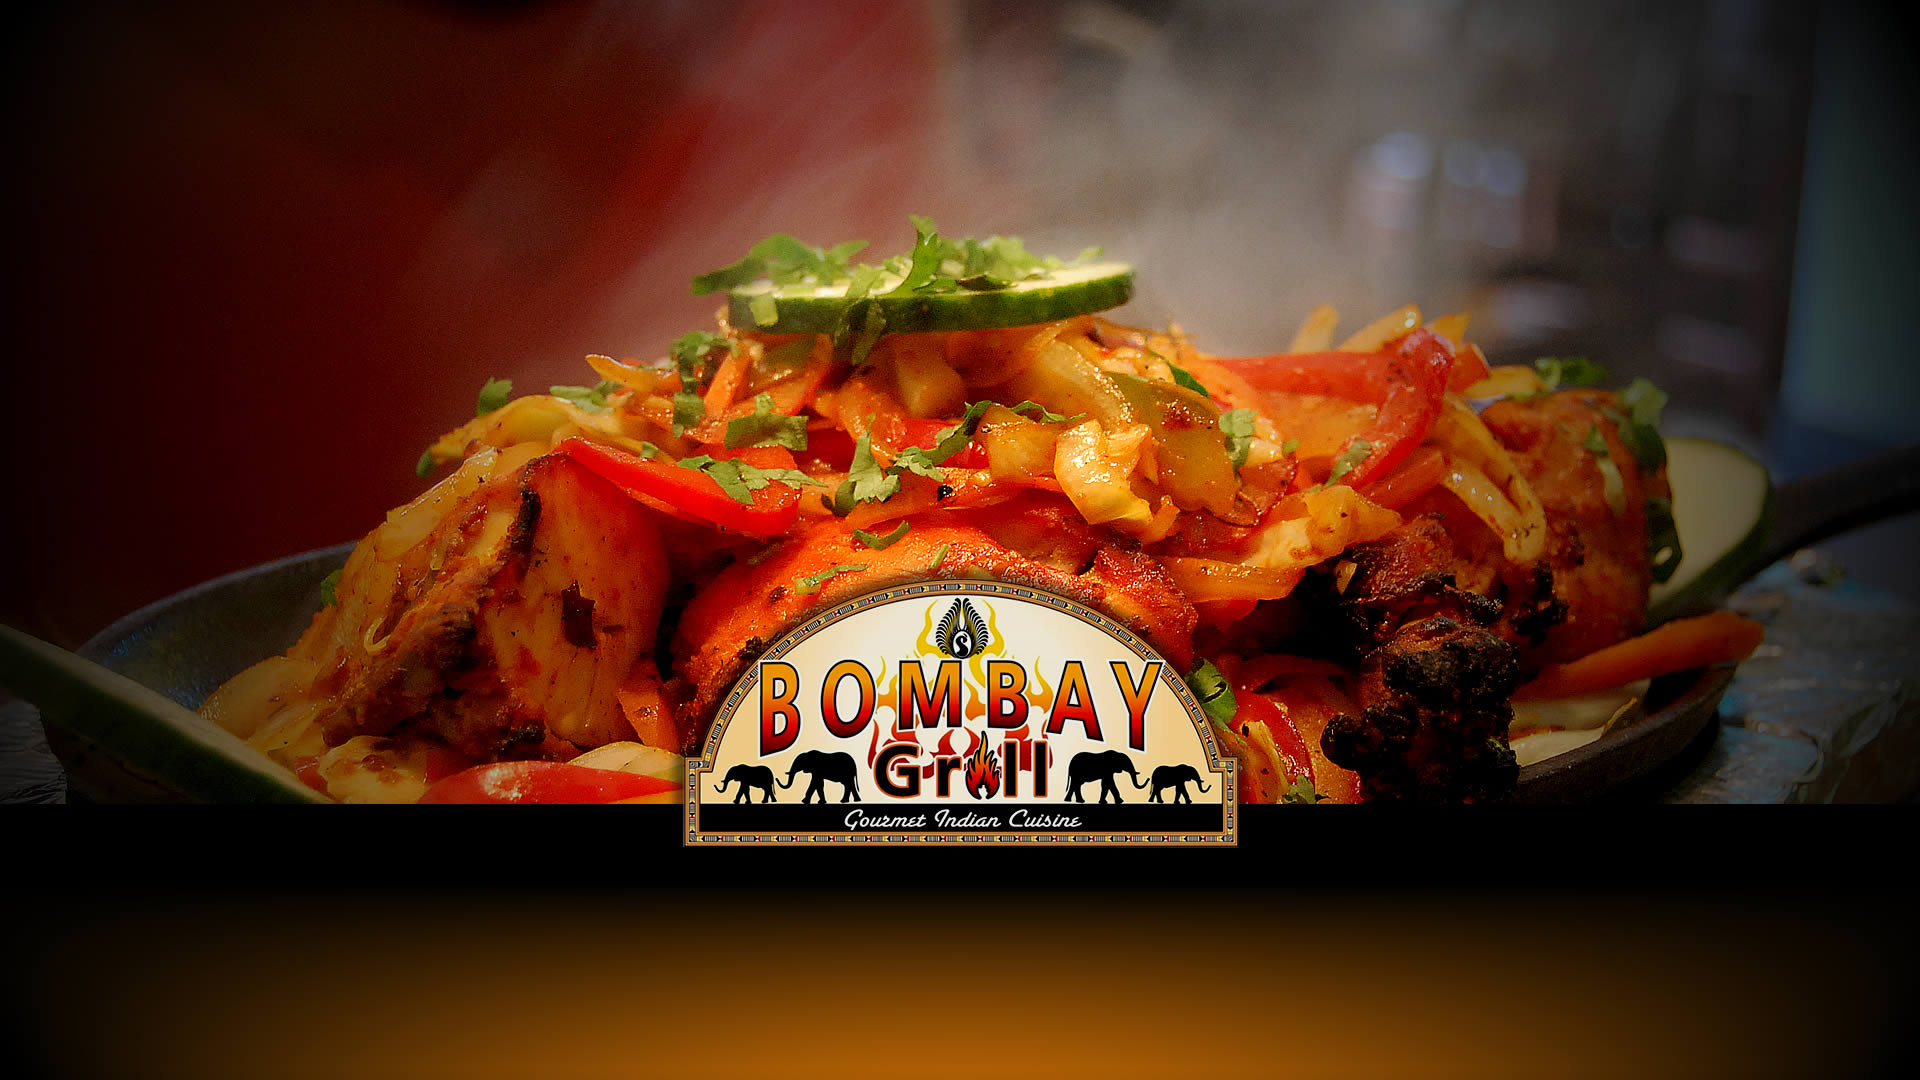 Best Gourmet Indian Restaurant In Rockland County Ny Bombay